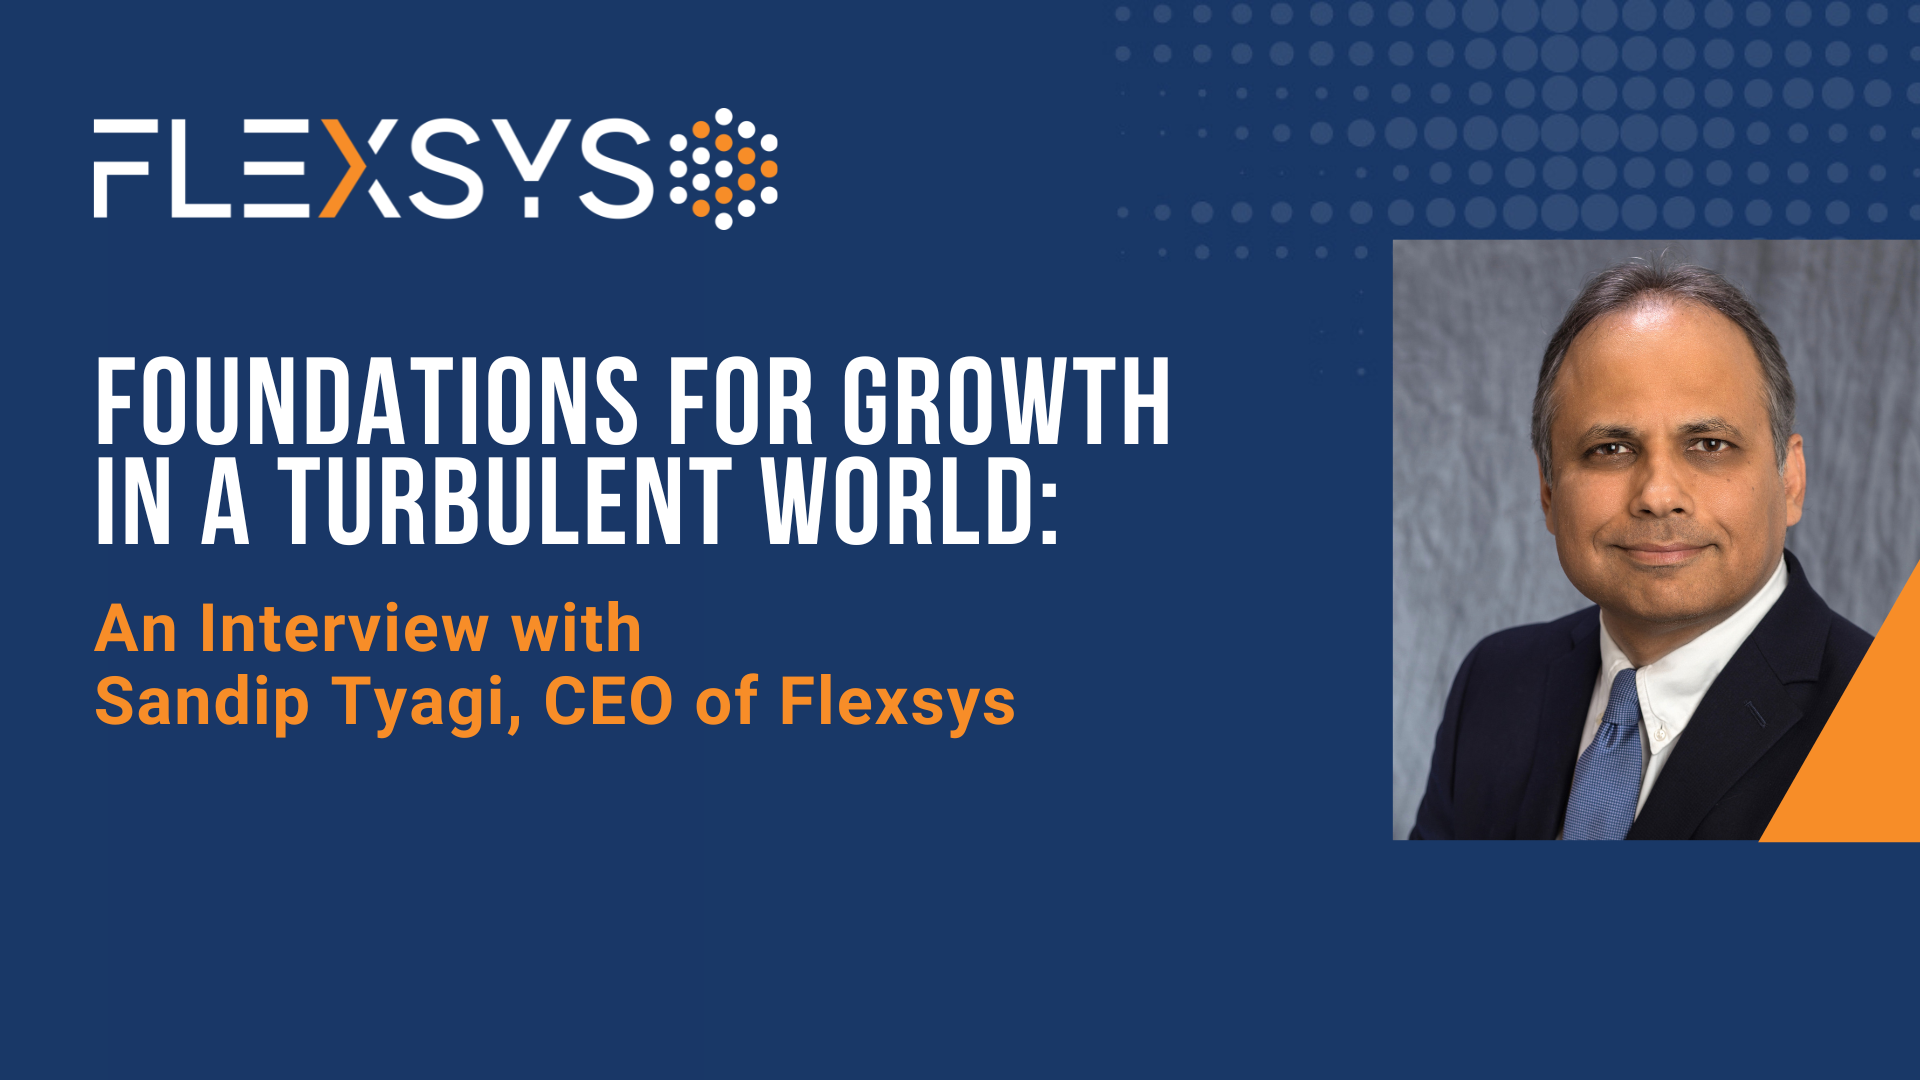 Interview with CEO of Flexsys